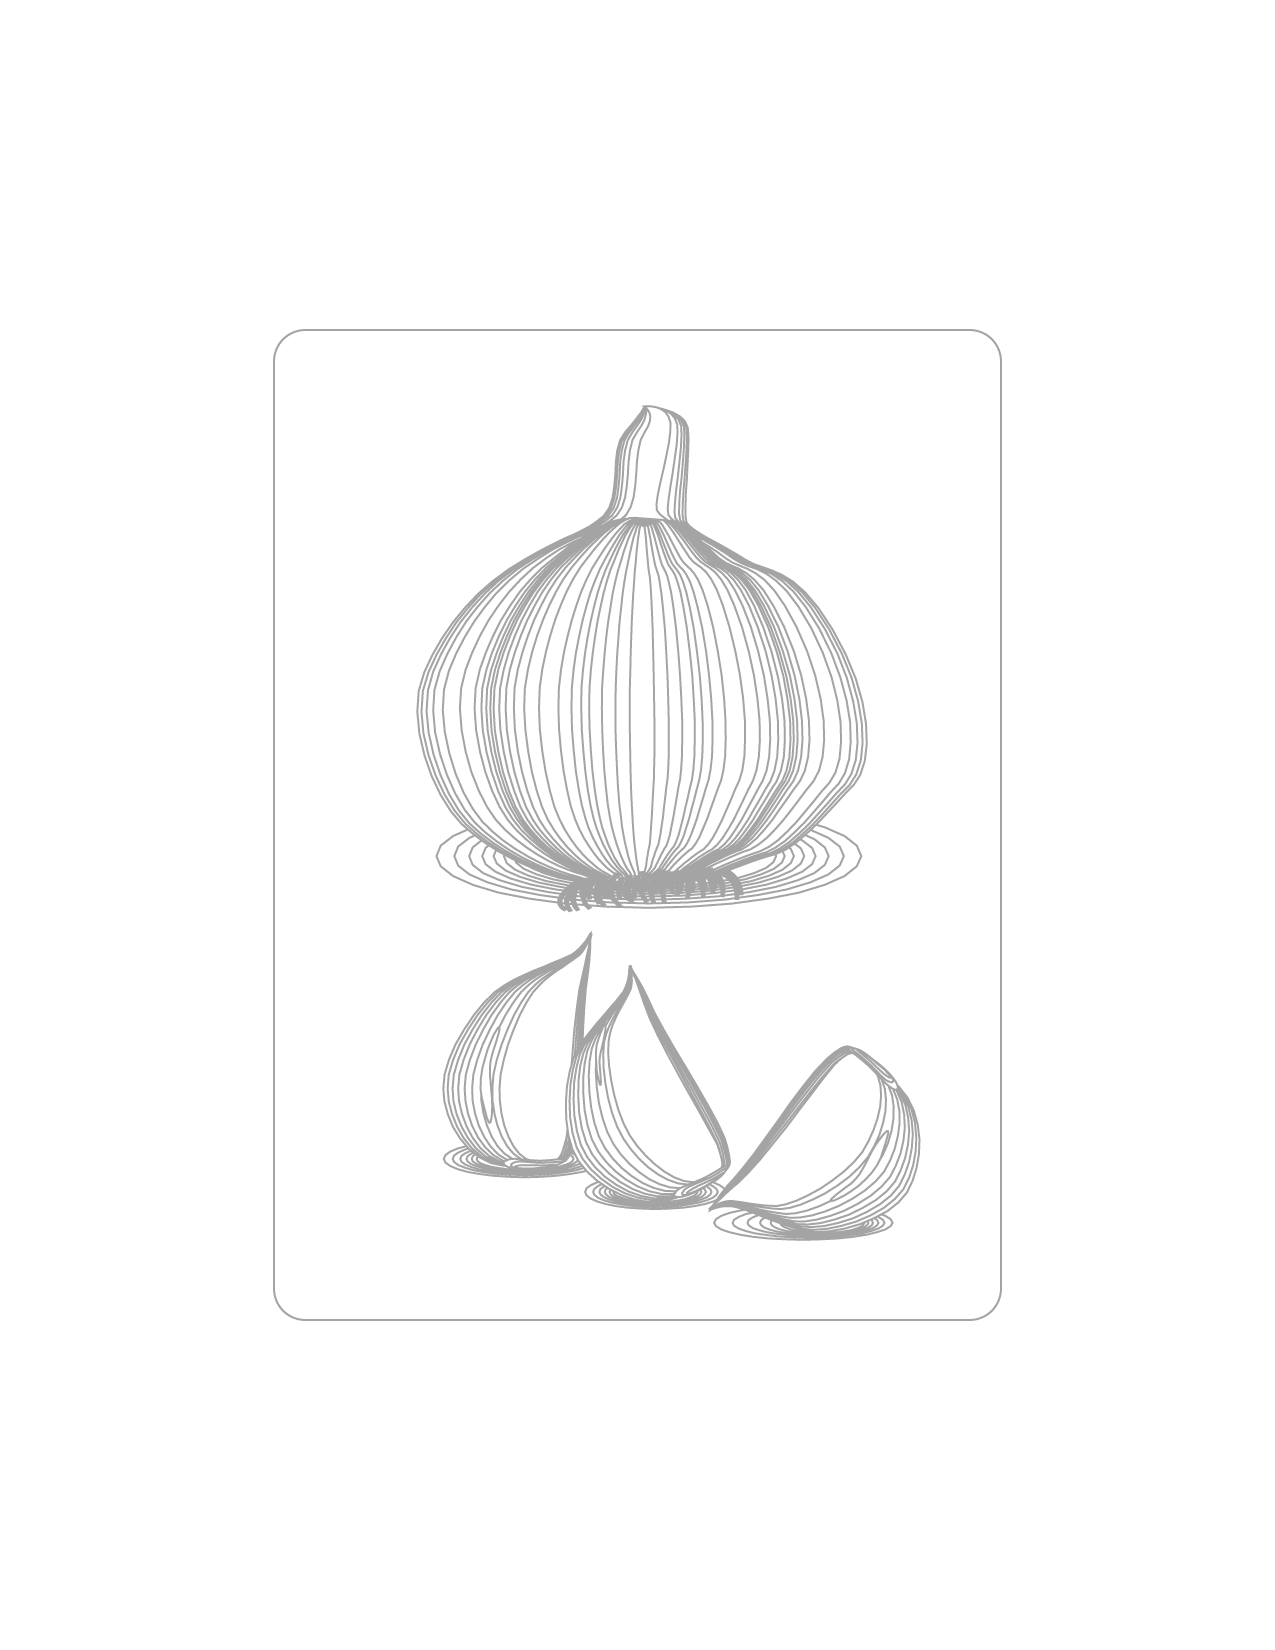 Garlic Bulb And Cloves Coloring Page